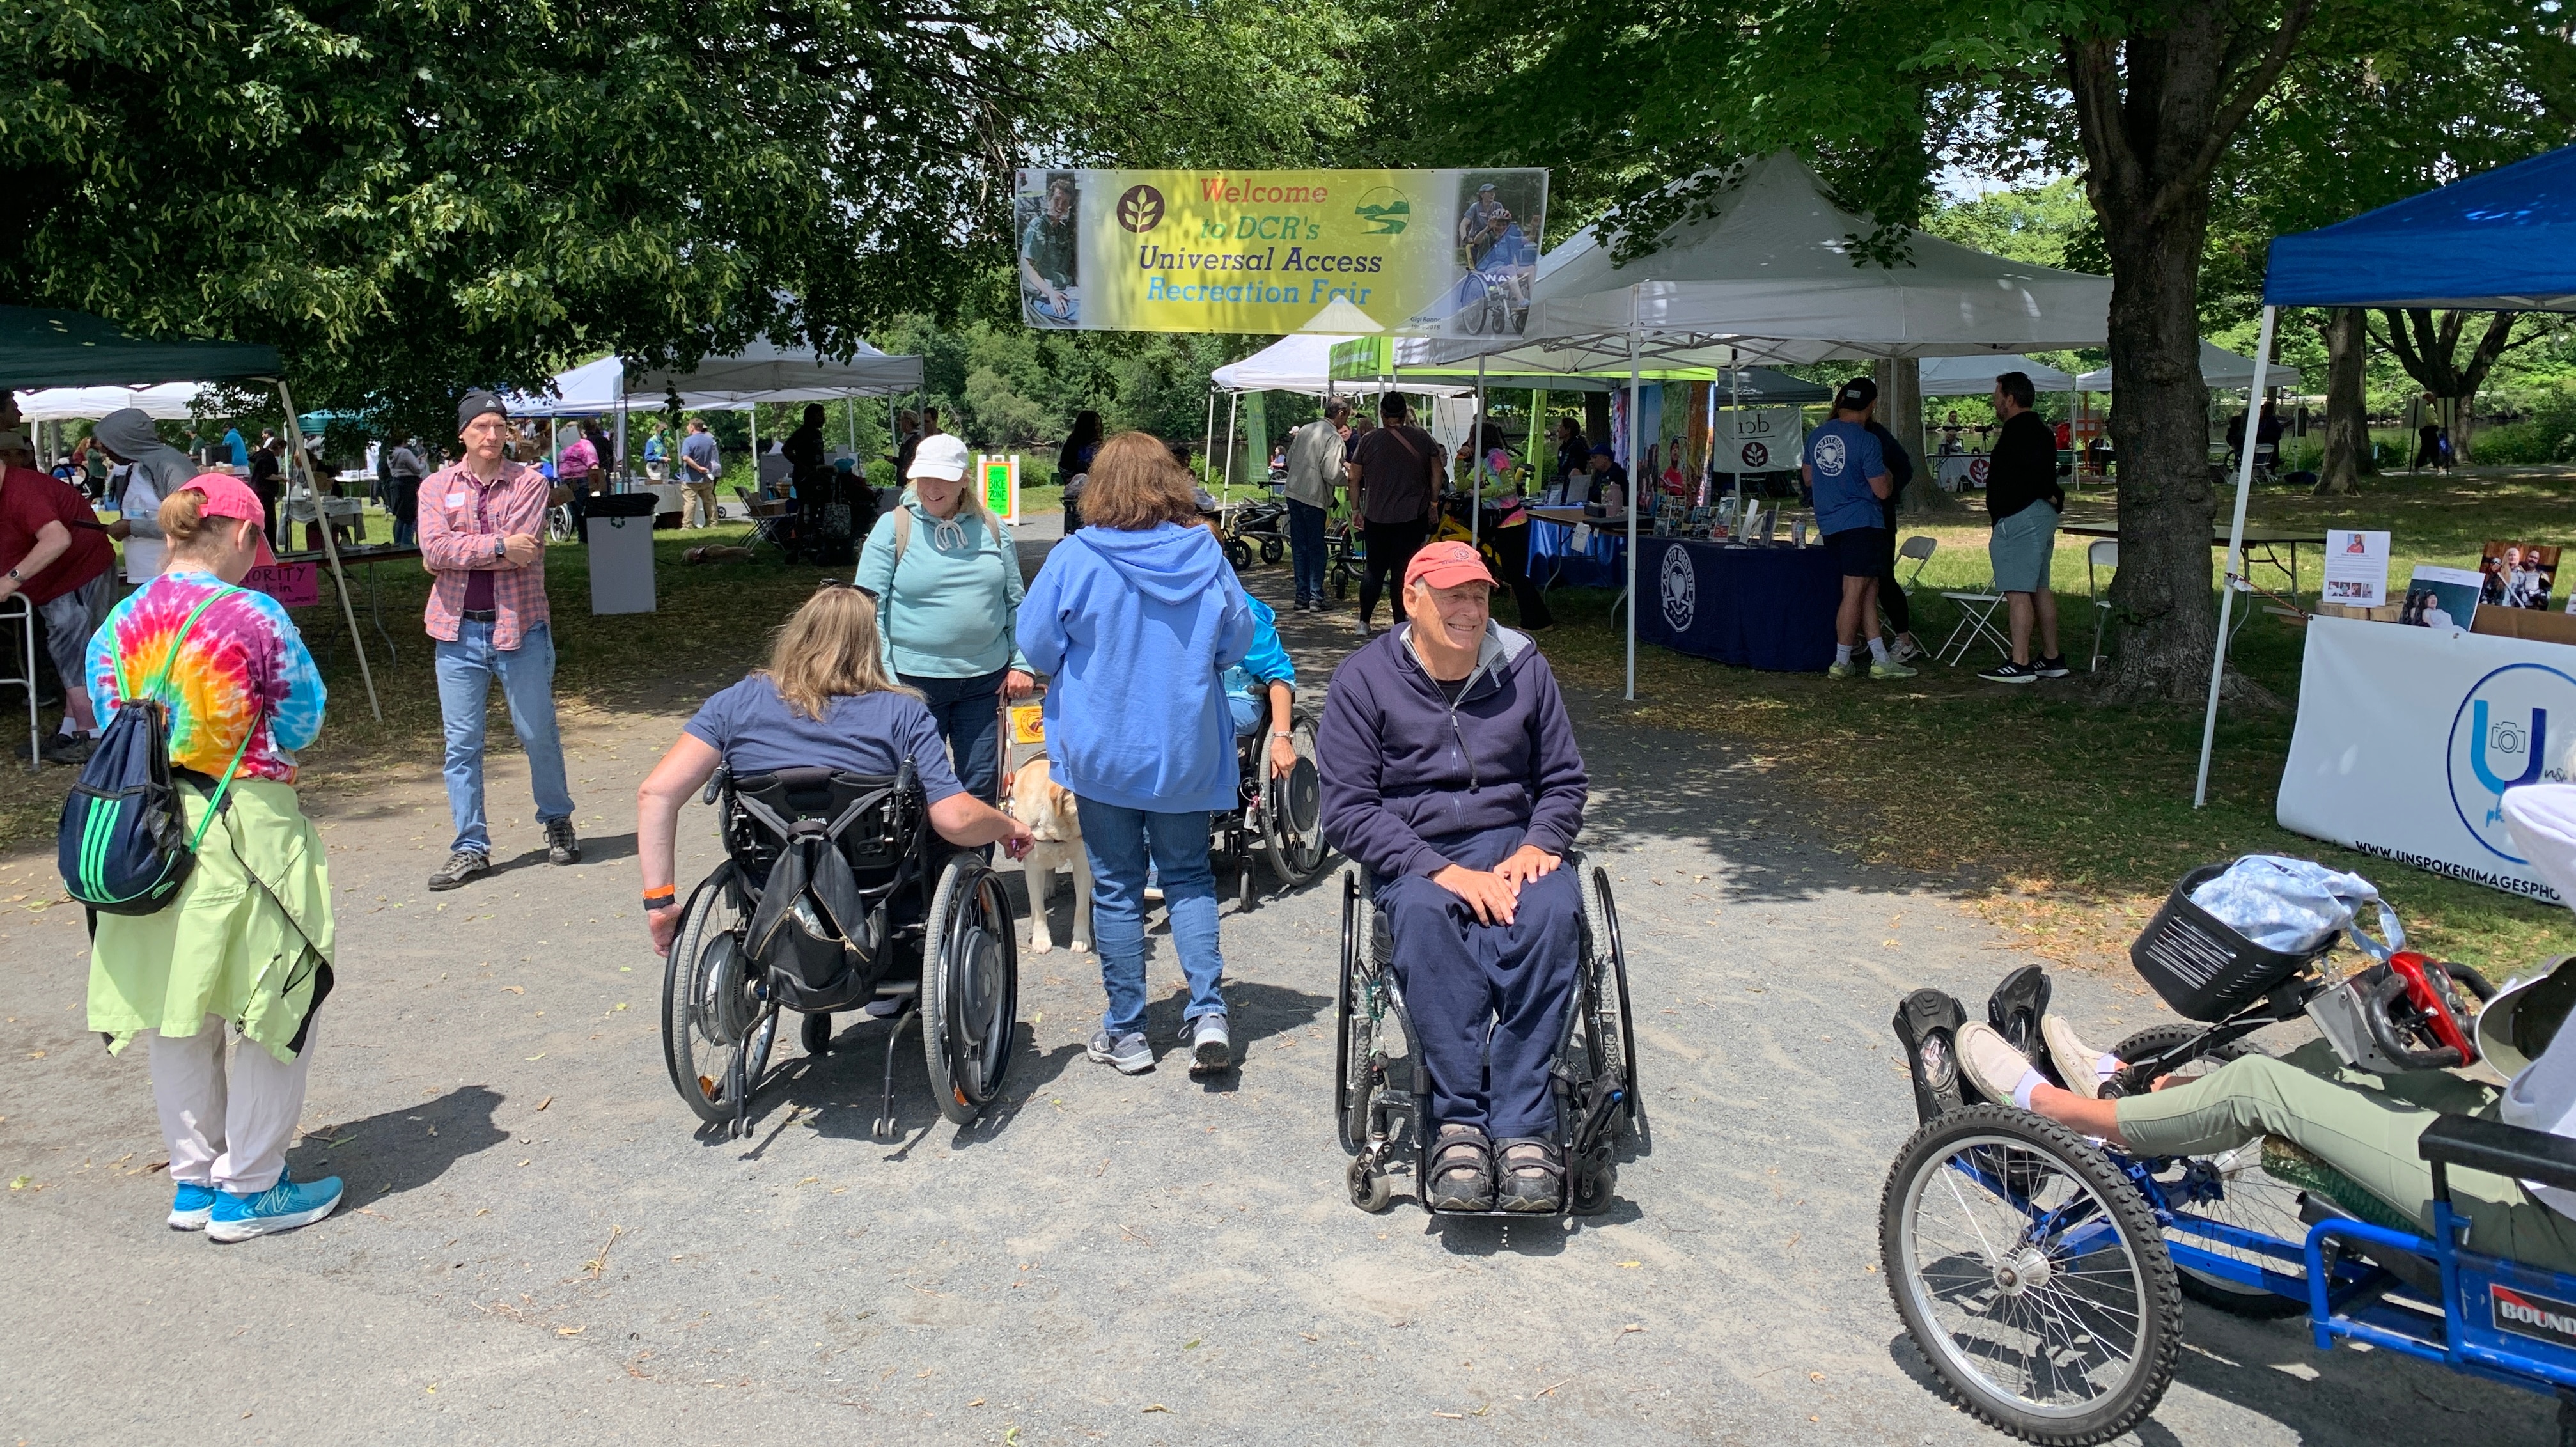 Tents are set up along a stone dust path that runs through a lawn surrounded by trees. There are information tables and equipment under the tents. Many people are are walking, using wheelchairs, and using adaptive cycles on the paths as they visit the tents.